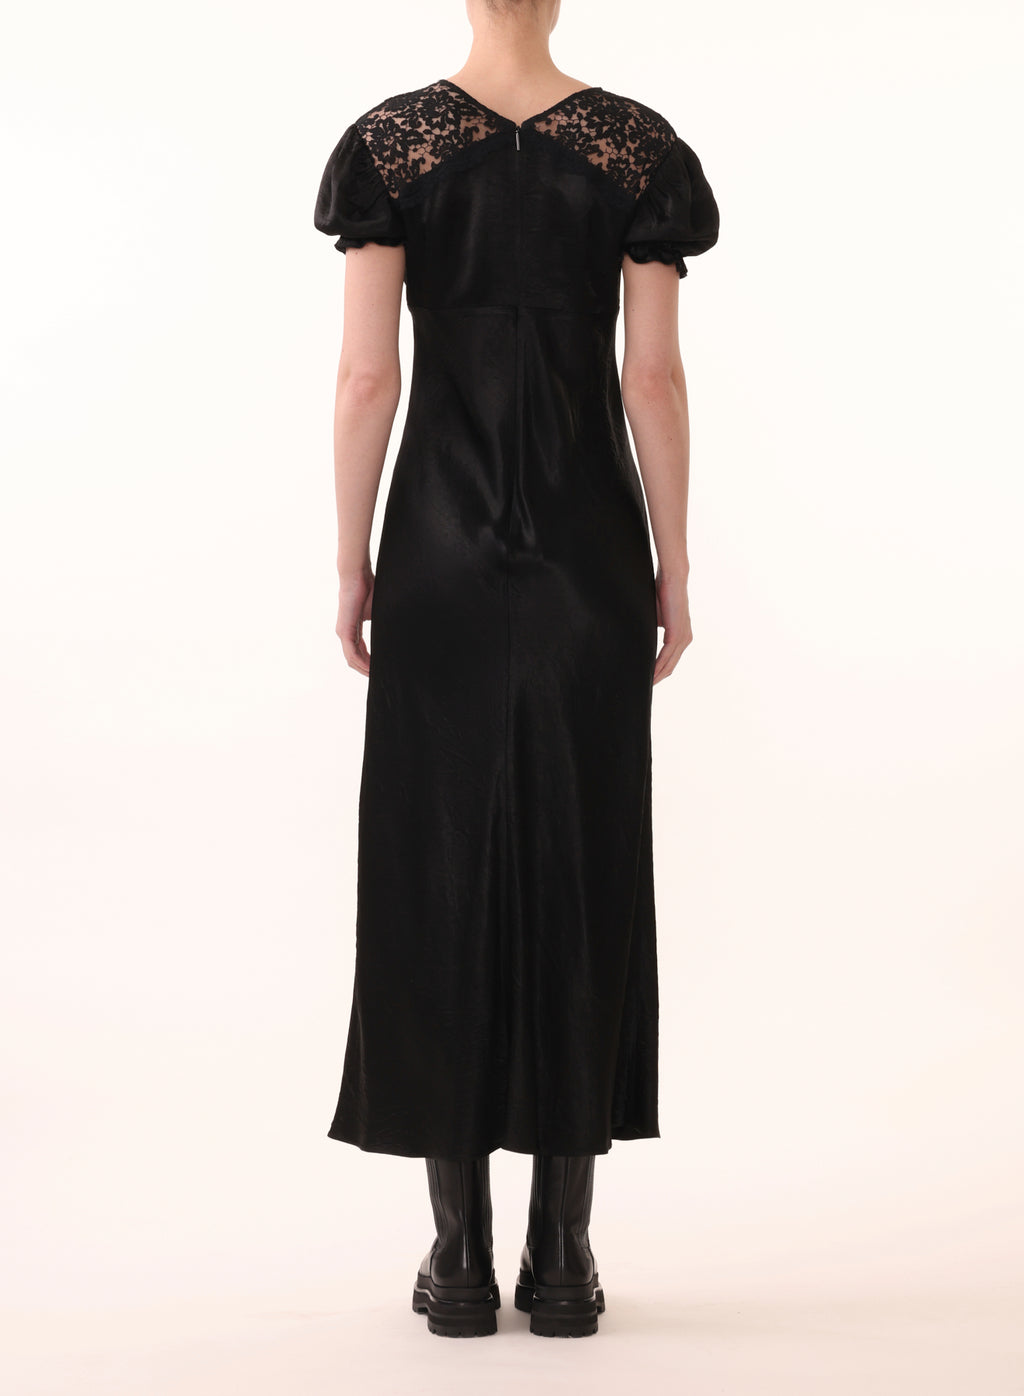 PUFF SLEEVE EMPIRE WAIST DRESS WITH LACE DETAIL view 5